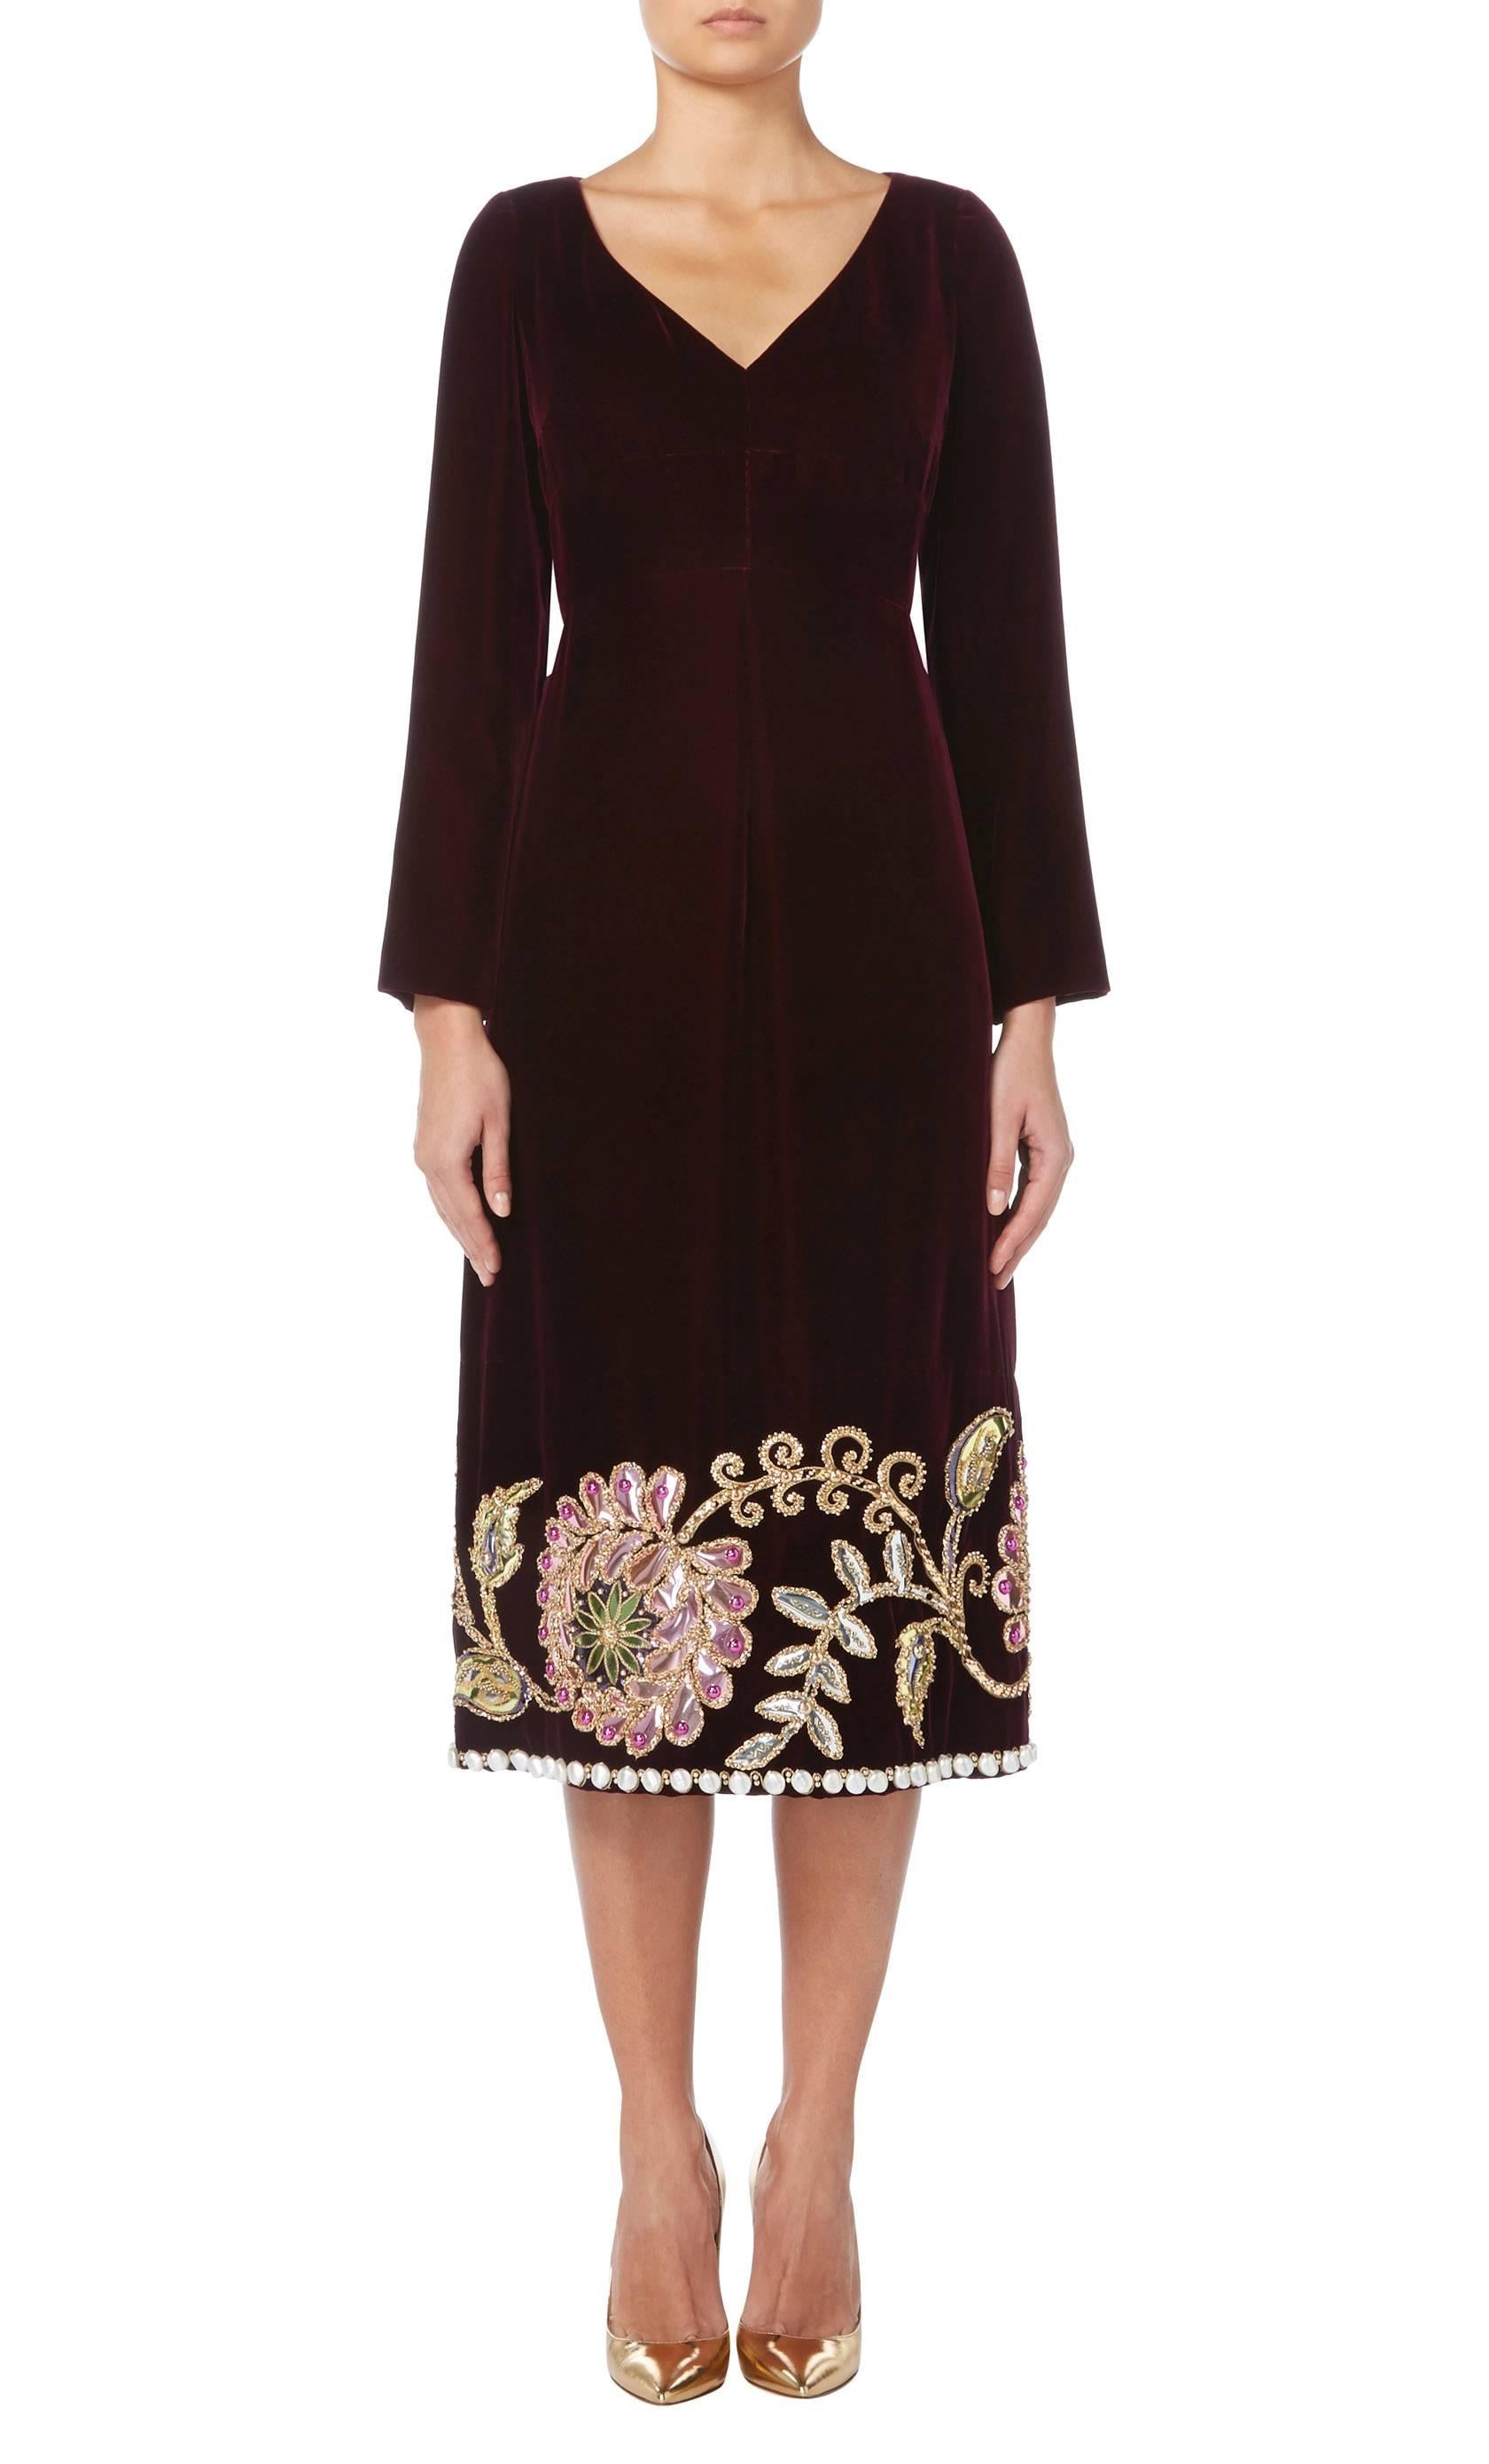 This dress is an amazing example of Marc Bohan for Dior from the Autumn Winter 1969 collection. Constructed in plush purple velvet, the dress features a v-neckline and long sleeves, while the hem is heavily embellished with metallic applique and